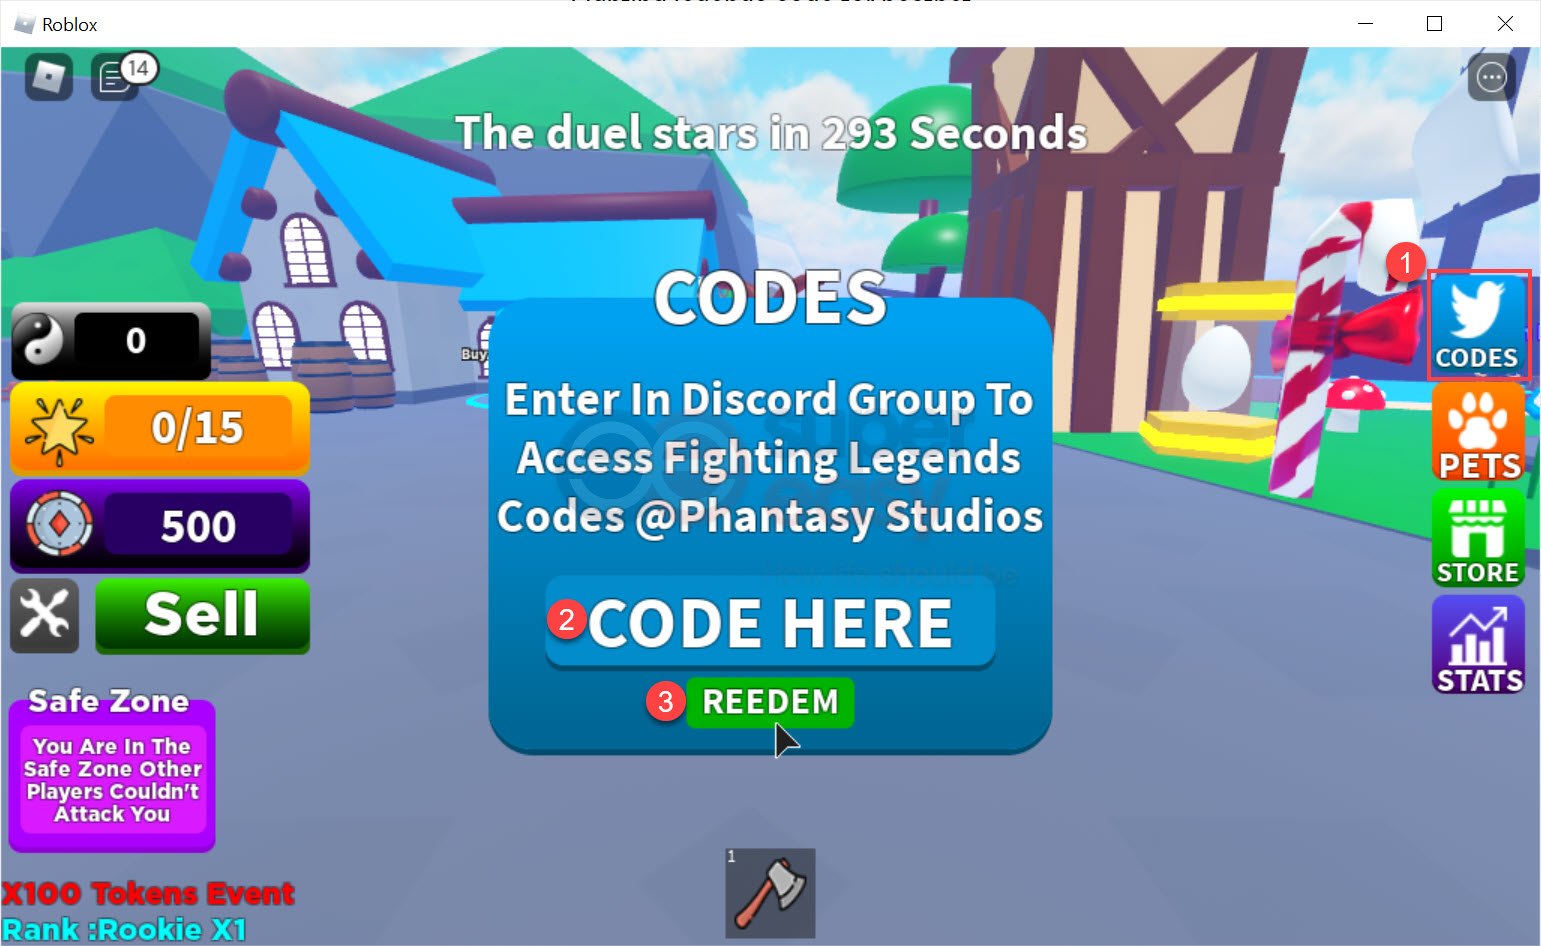 NEW] Roblox Fighting Legends codes Mar 2023 - Super Easy